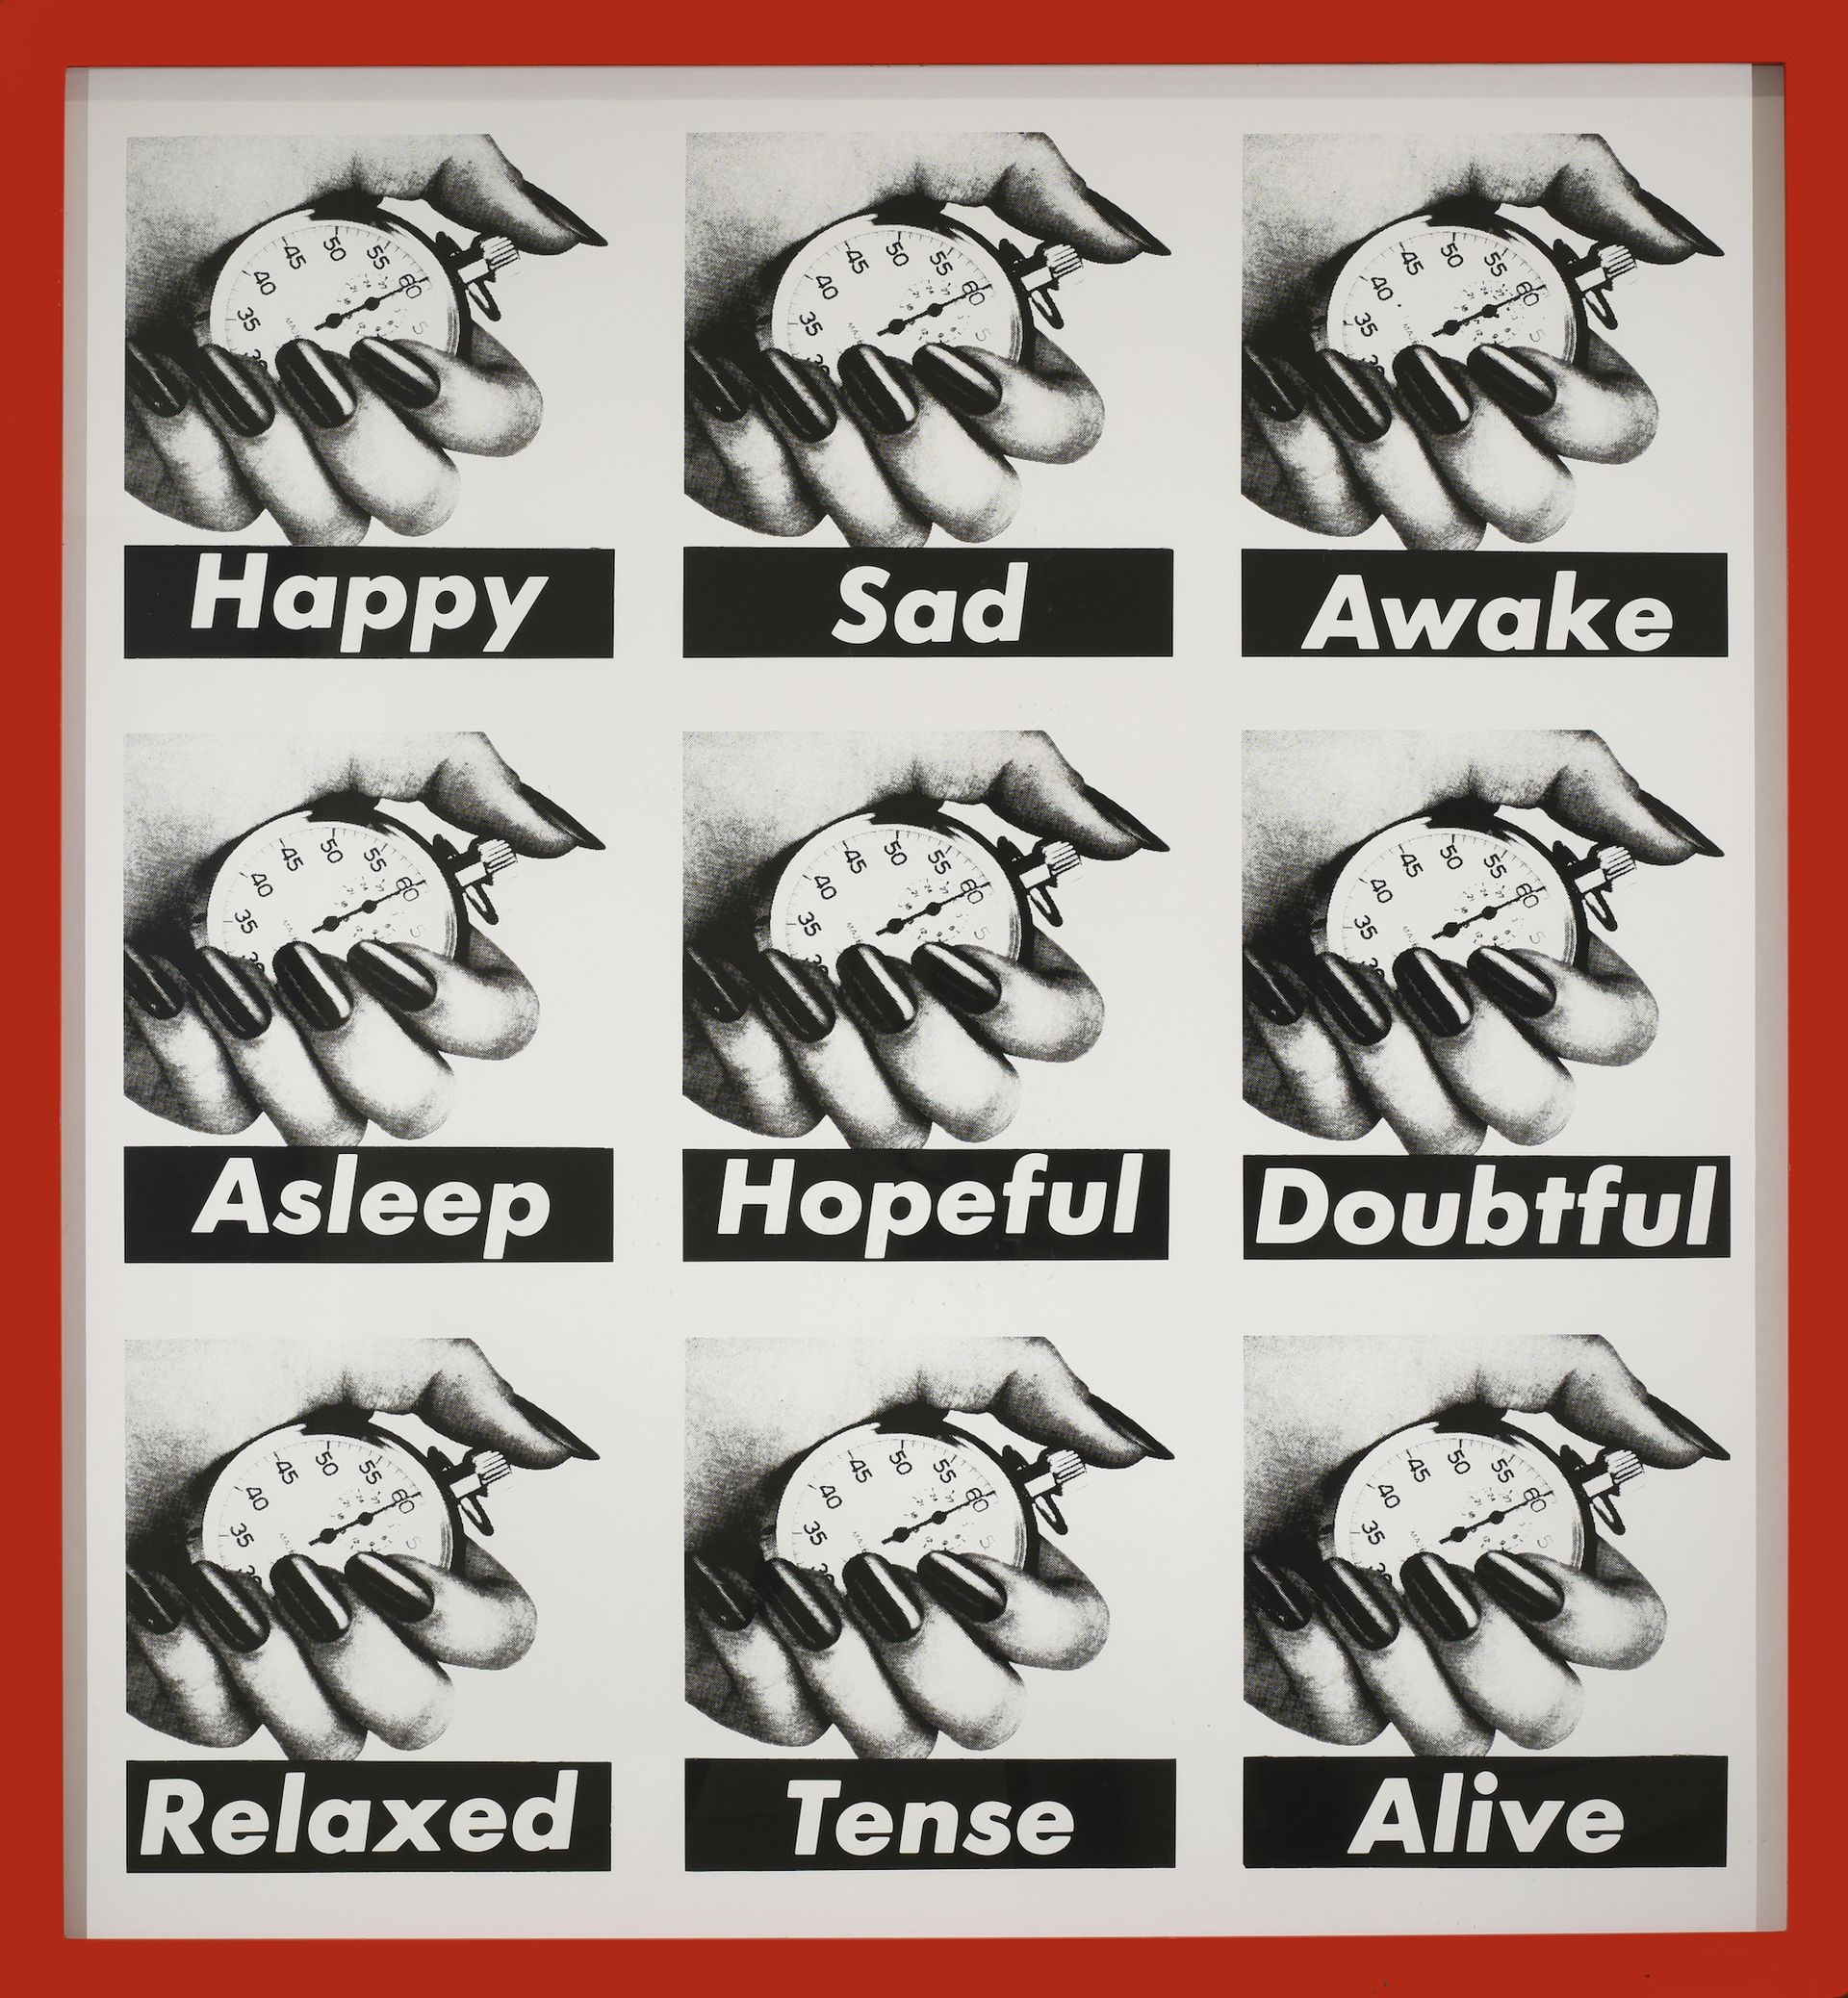 Barbara Kruger, Untitled, 1989.  Collection of Orange County Museum of Art. Gift of Eugene C. White and the estate of Robert H. Tyler. © Barbara Kruger